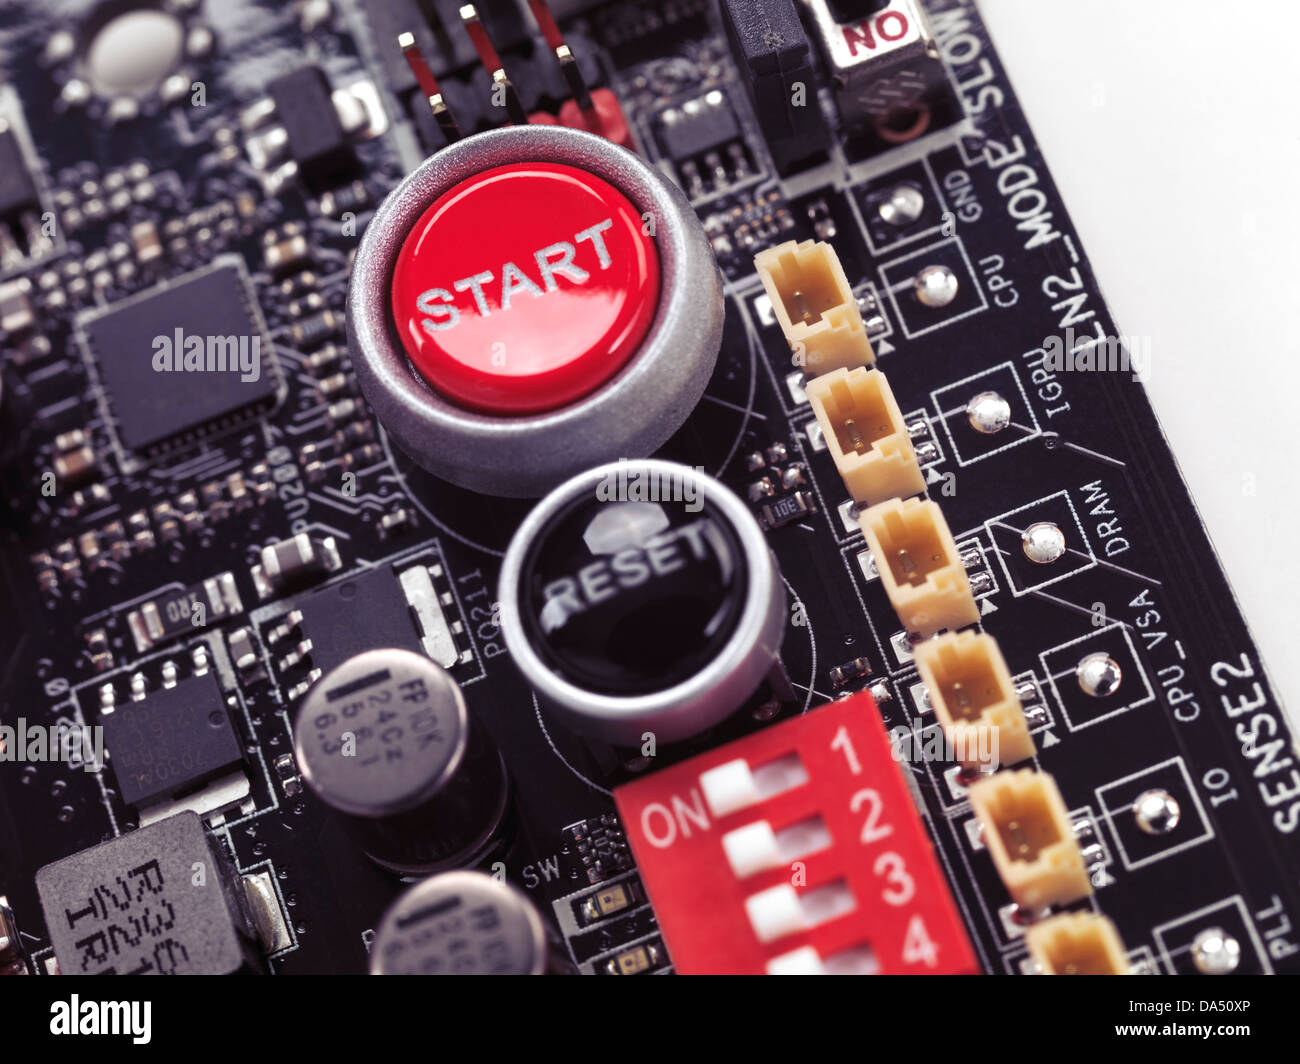 Start and Reset buttons on computer motherboard closeup Stock Photo